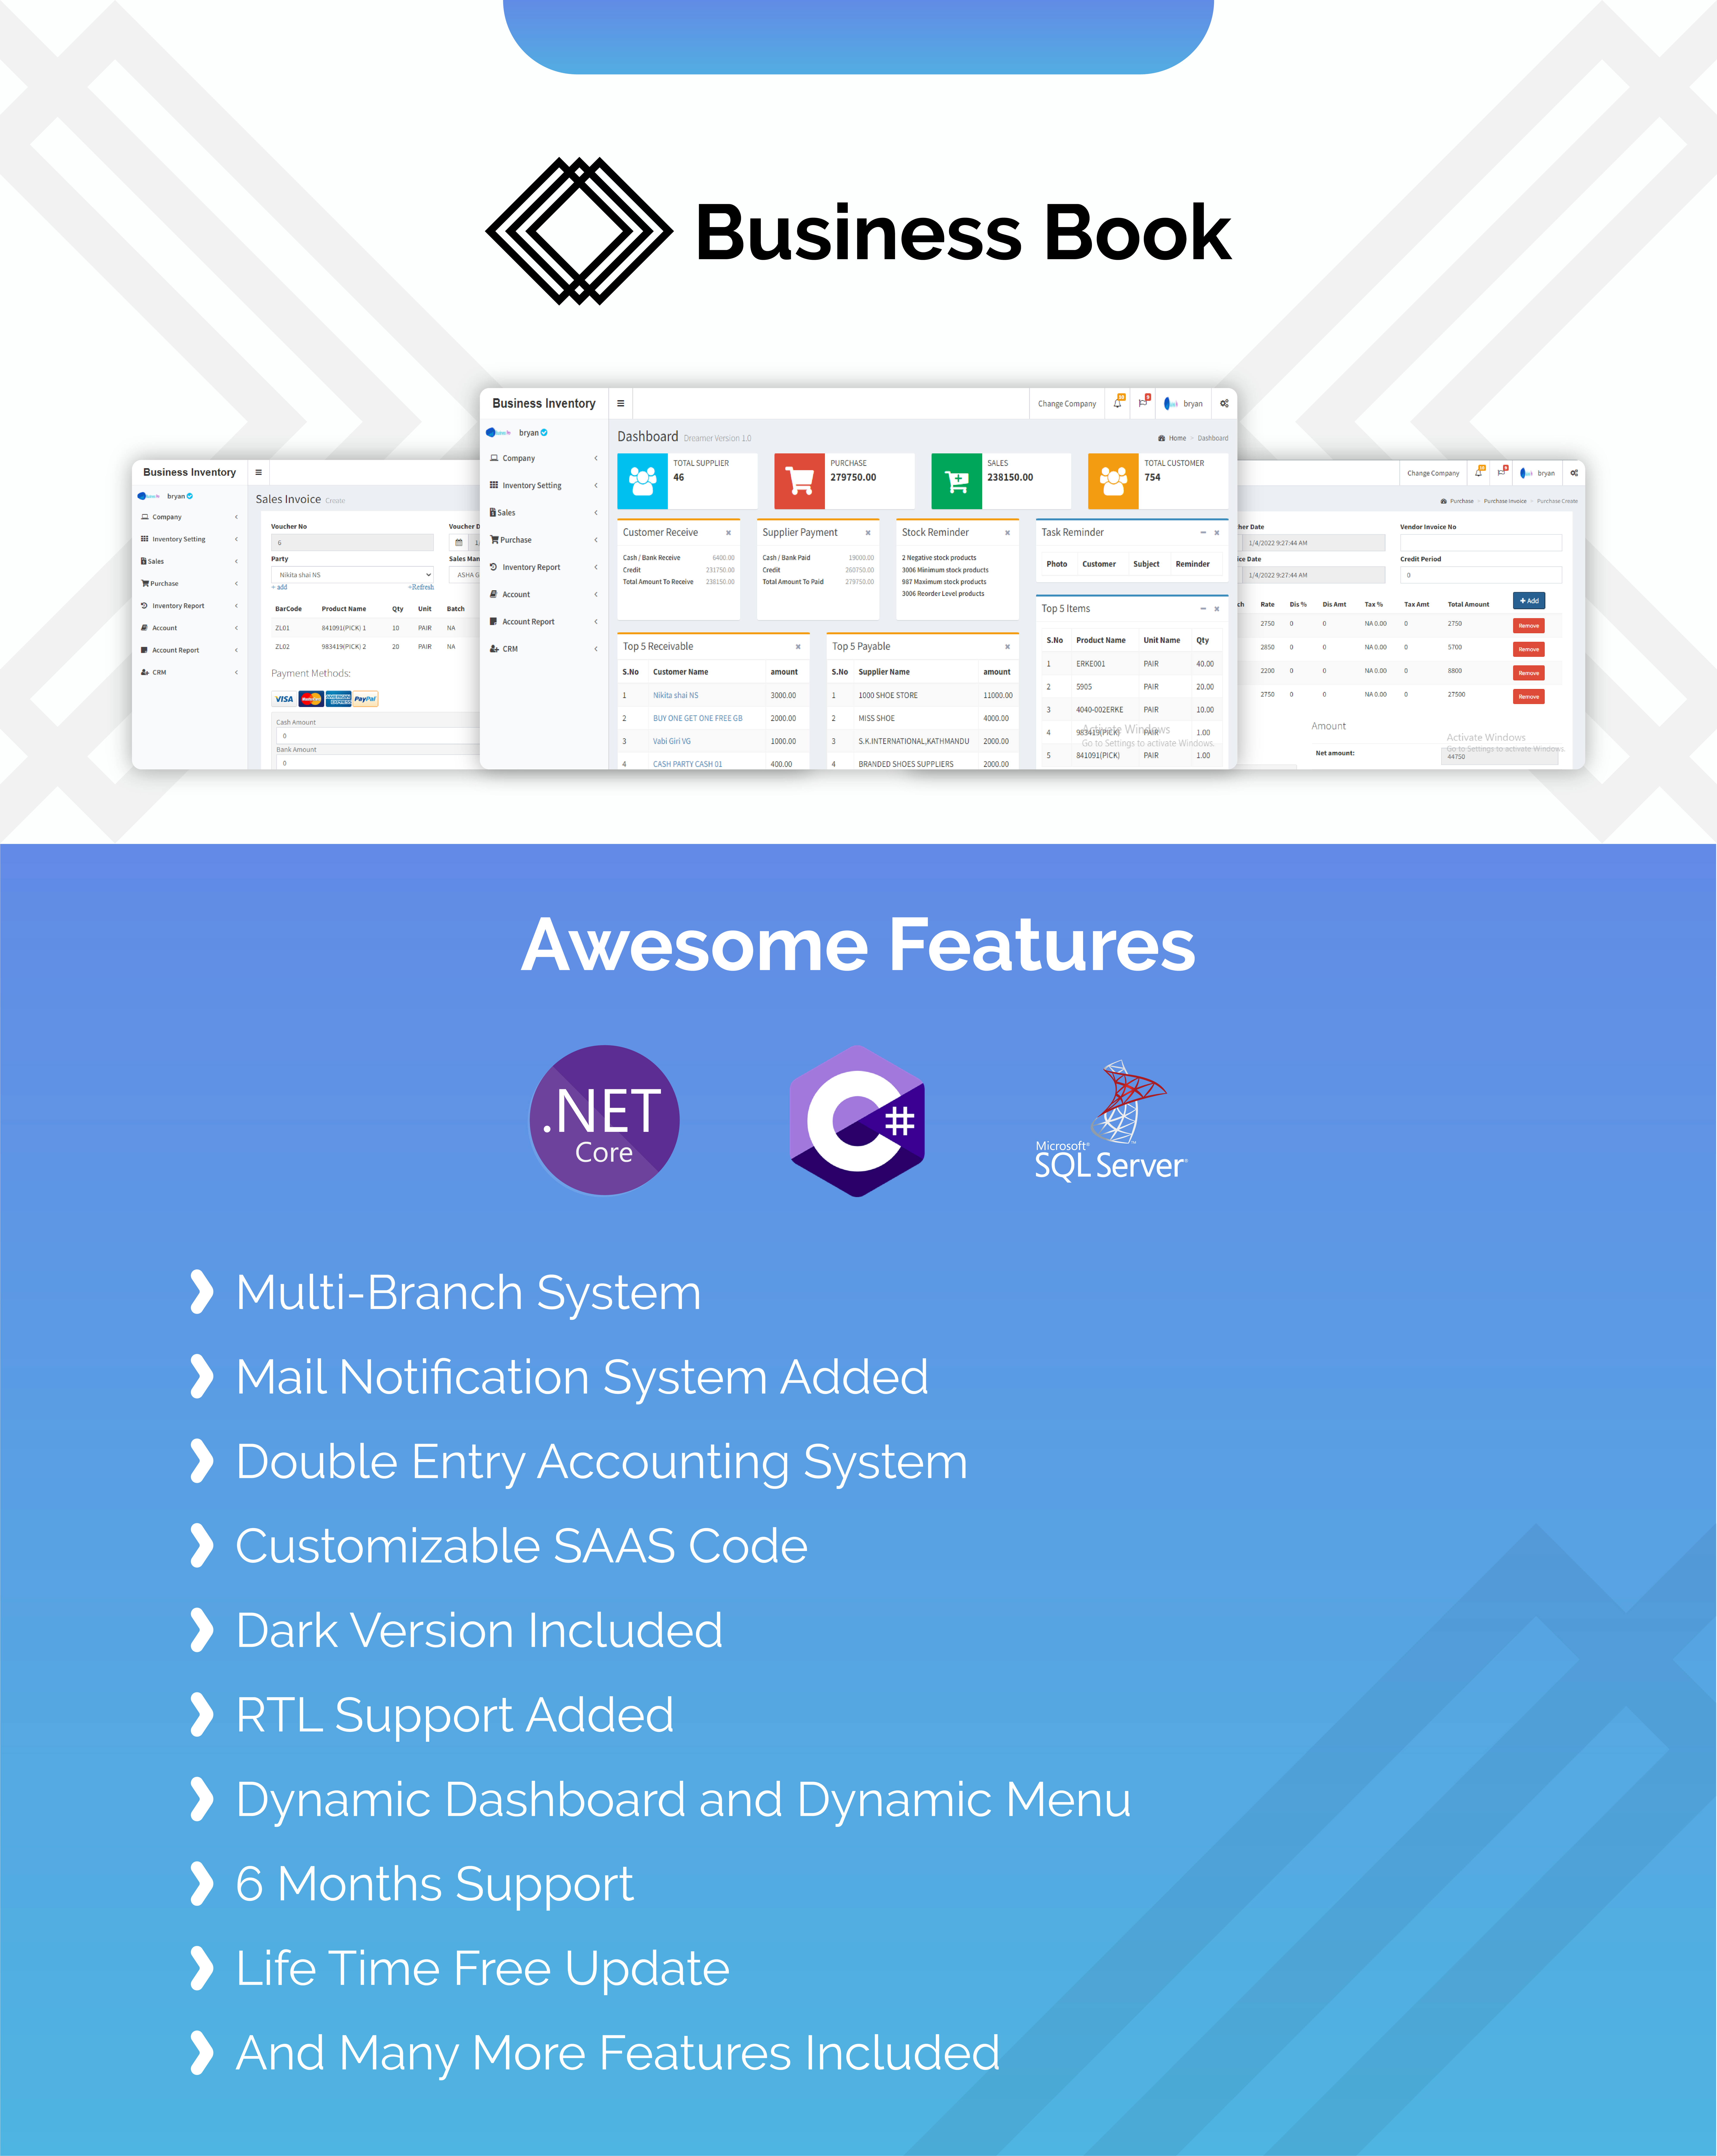 BusinessBook - Cloud-Based Online Inventory & Accounting Software - 1